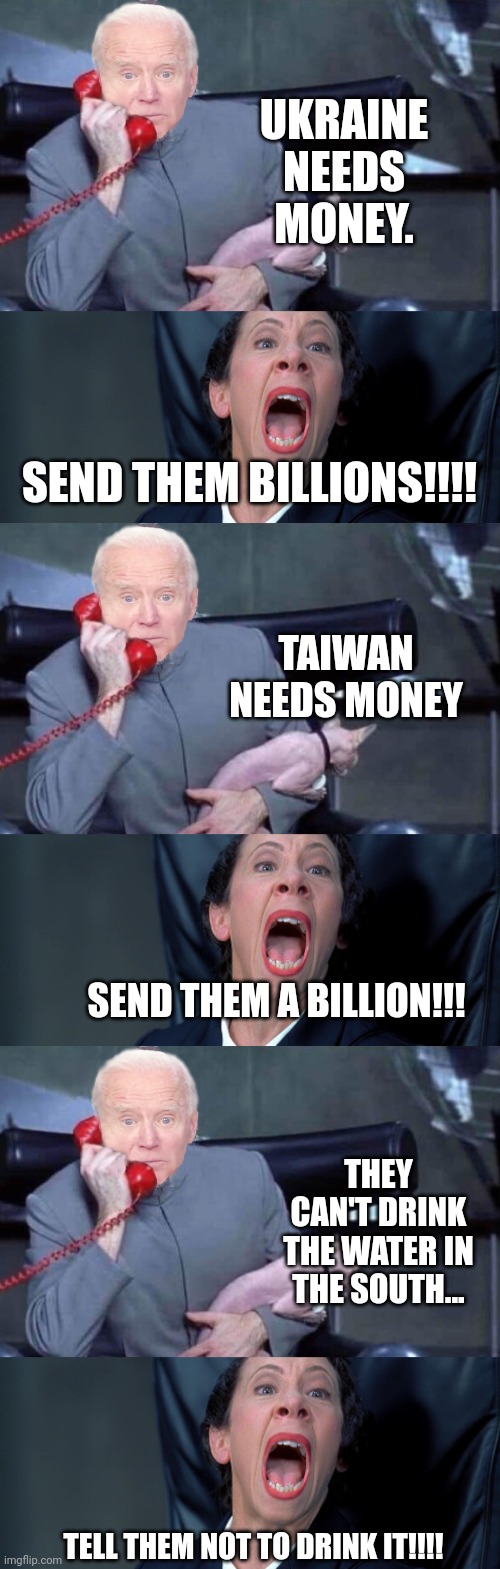 You President hard at work lining the pockets of foreign entities. | UKRAINE NEEDS MONEY. SEND THEM BILLIONS!!!! TAIWAN NEEDS MONEY; SEND THEM A BILLION!!! THEY CAN'T DRINK THE WATER IN THE SOUTH... TELL THEM NOT TO DRINK IT!!!! | image tagged in evil biden frau | made w/ Imgflip meme maker